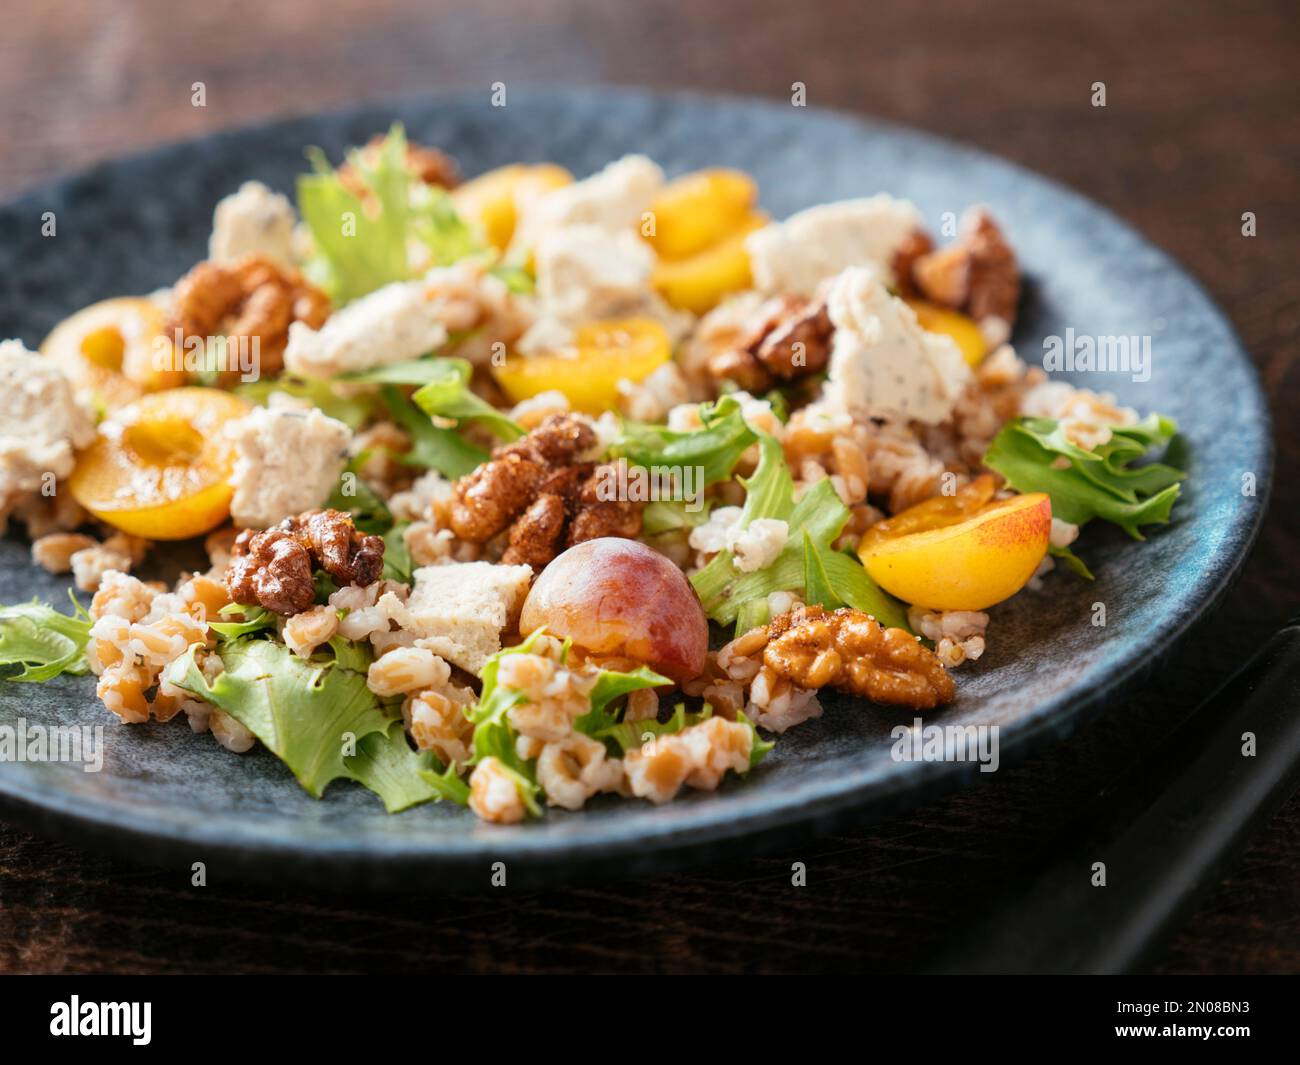 Farro Salad with Mirabelle Plums, Vegan Feta and Spicy Walnuts Stock Photo